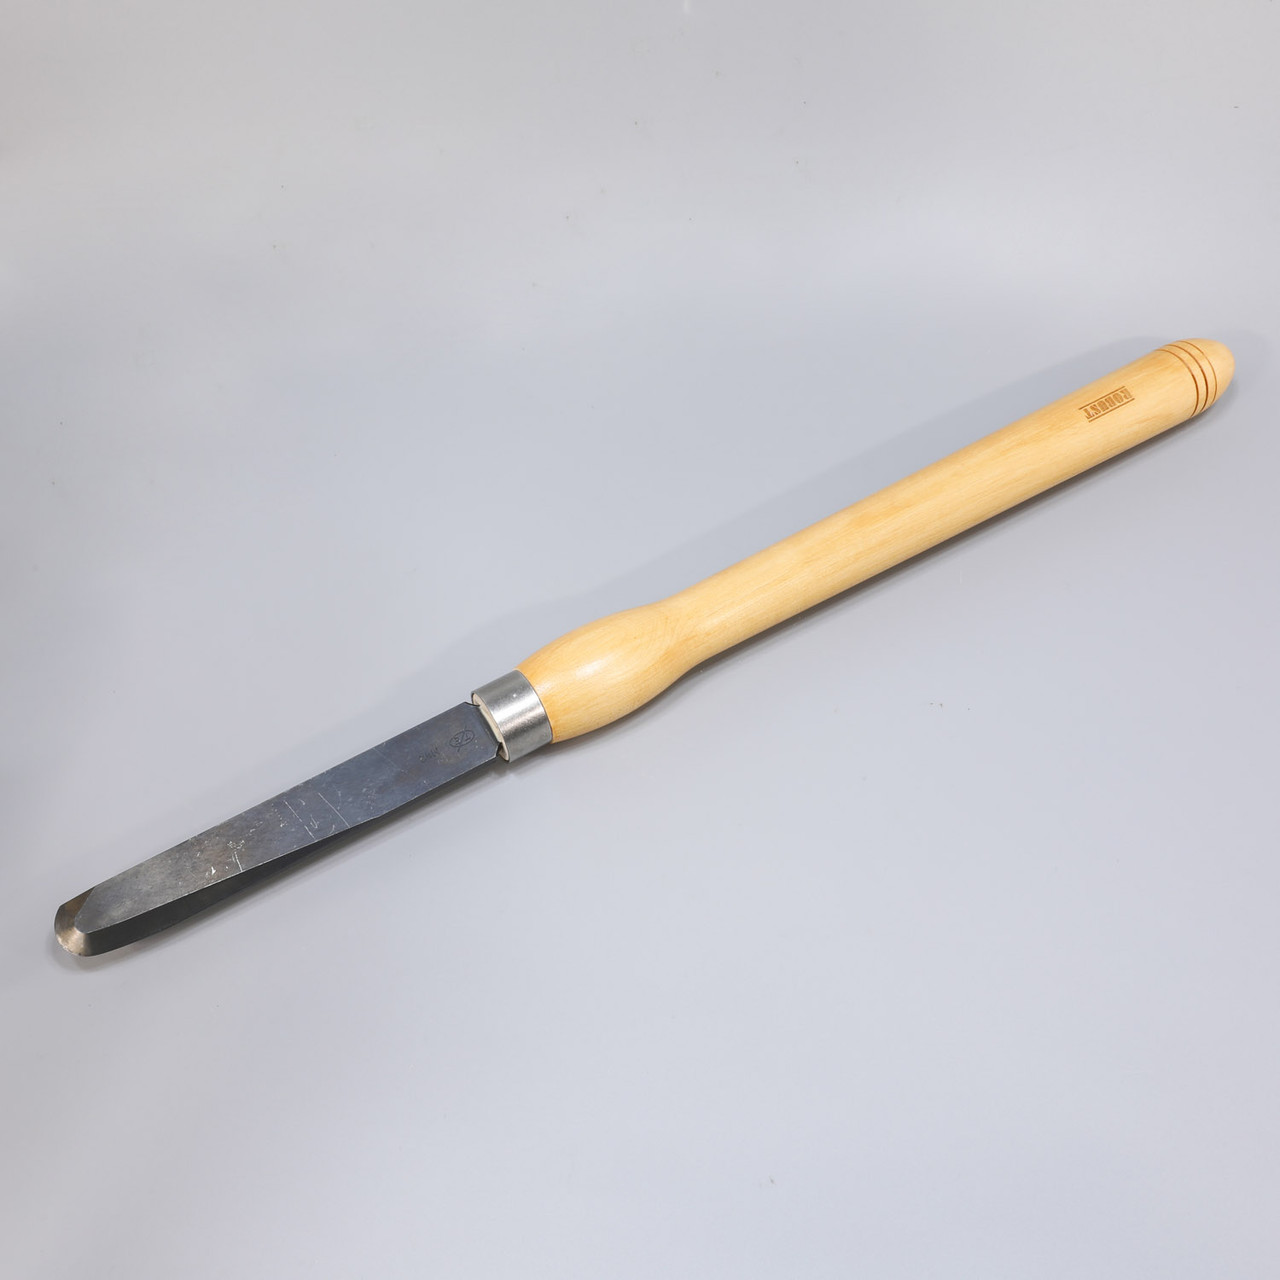 Robust, NRS-LG-WH, 1" x 5/16" Large Negative Rake Scraper with Maple Handle